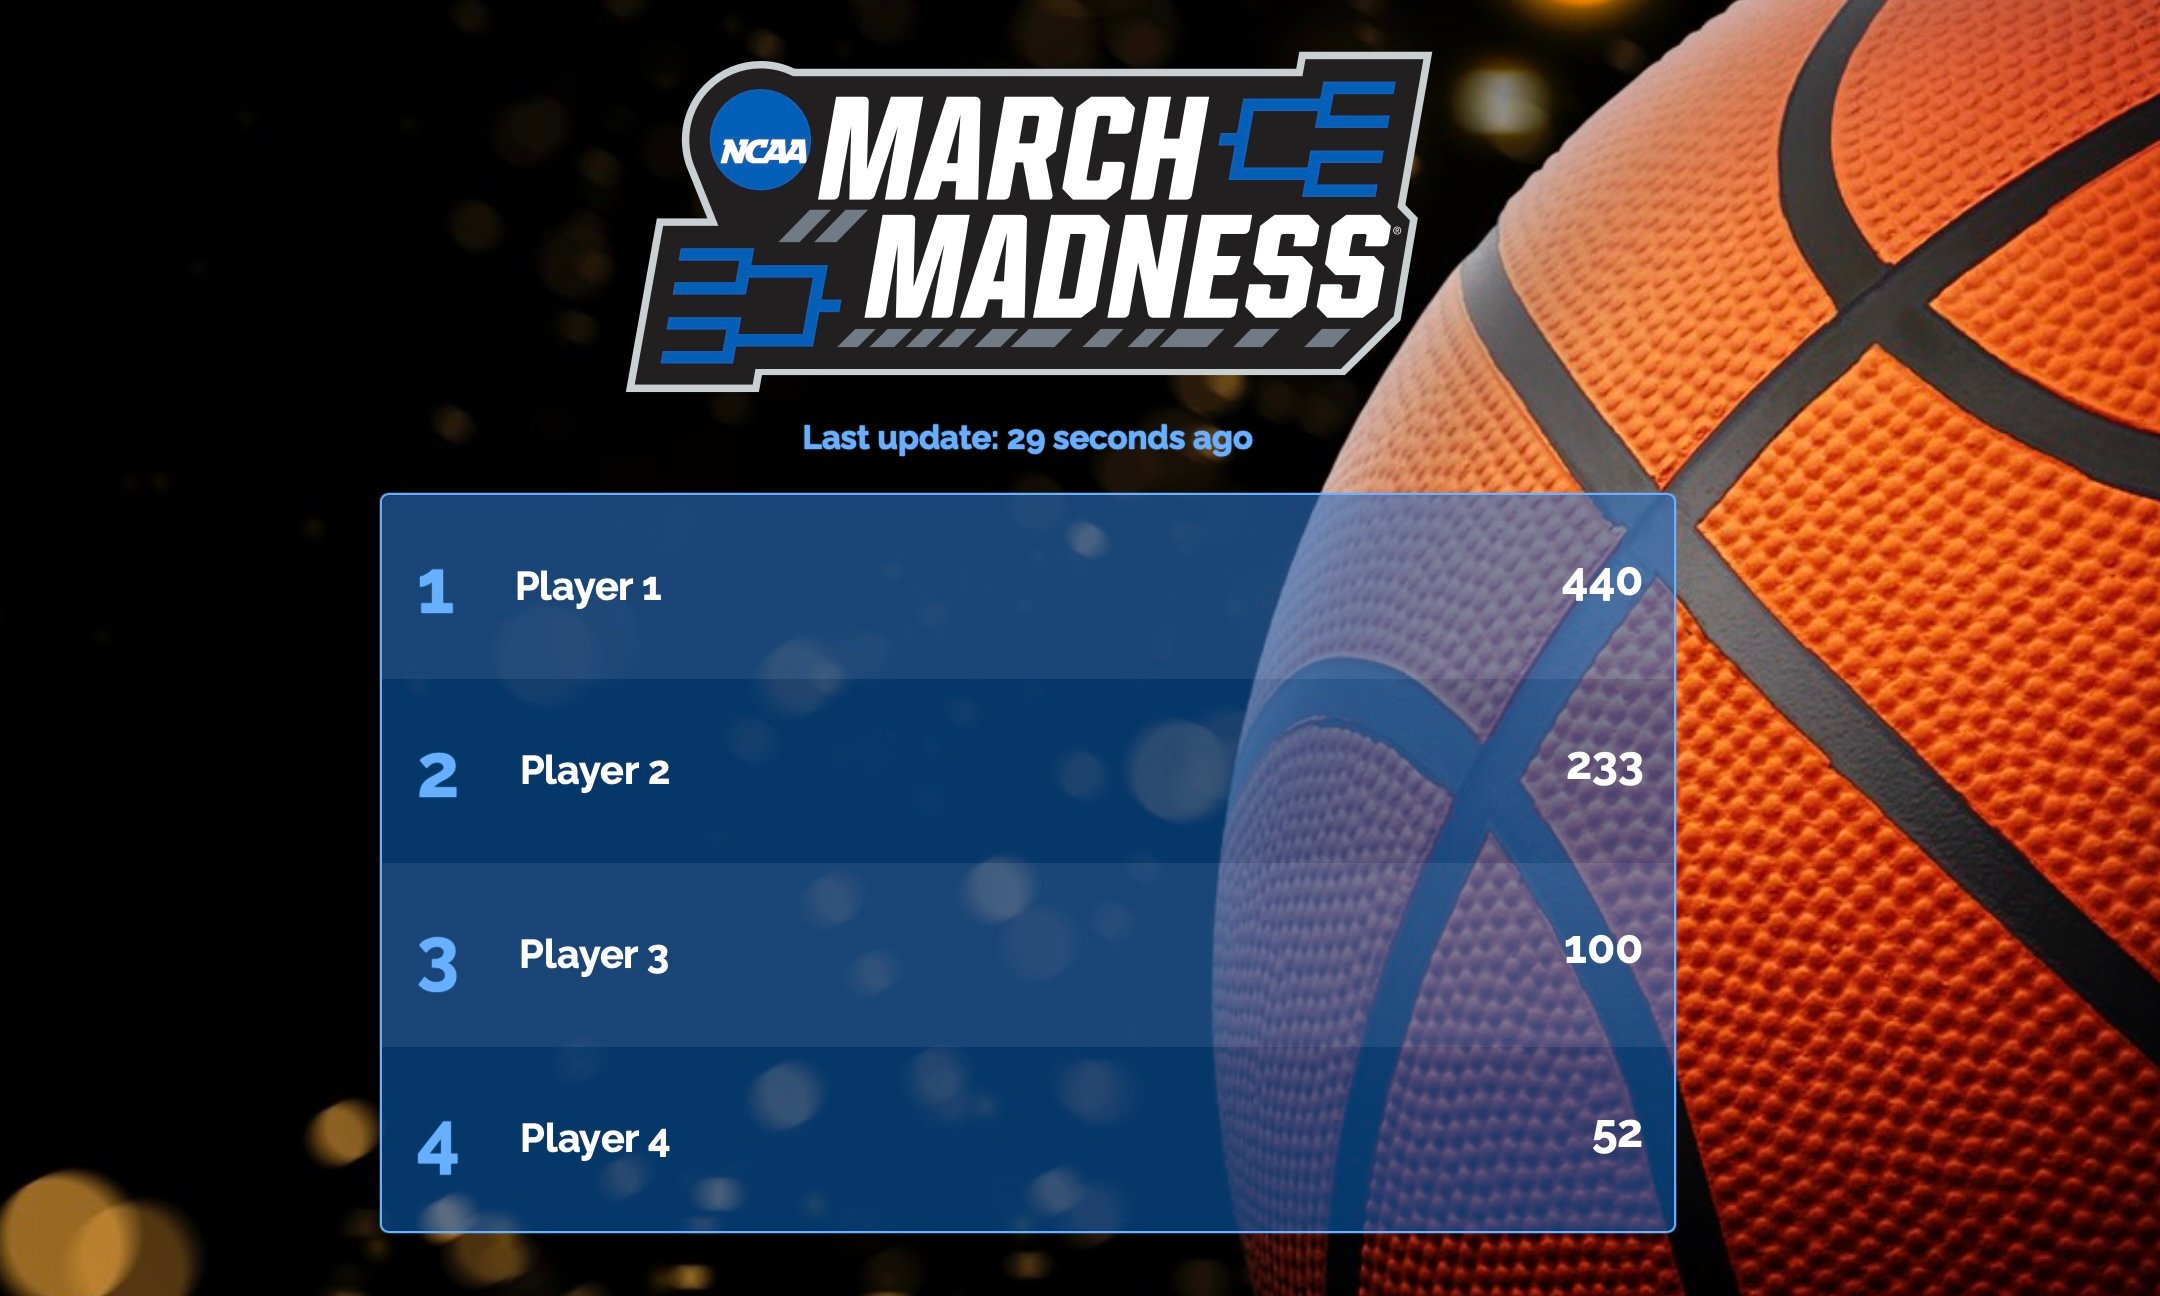 Discover how to create engaging March Madness leaderboards, tailor them to your preferences, and share with your community or friends.